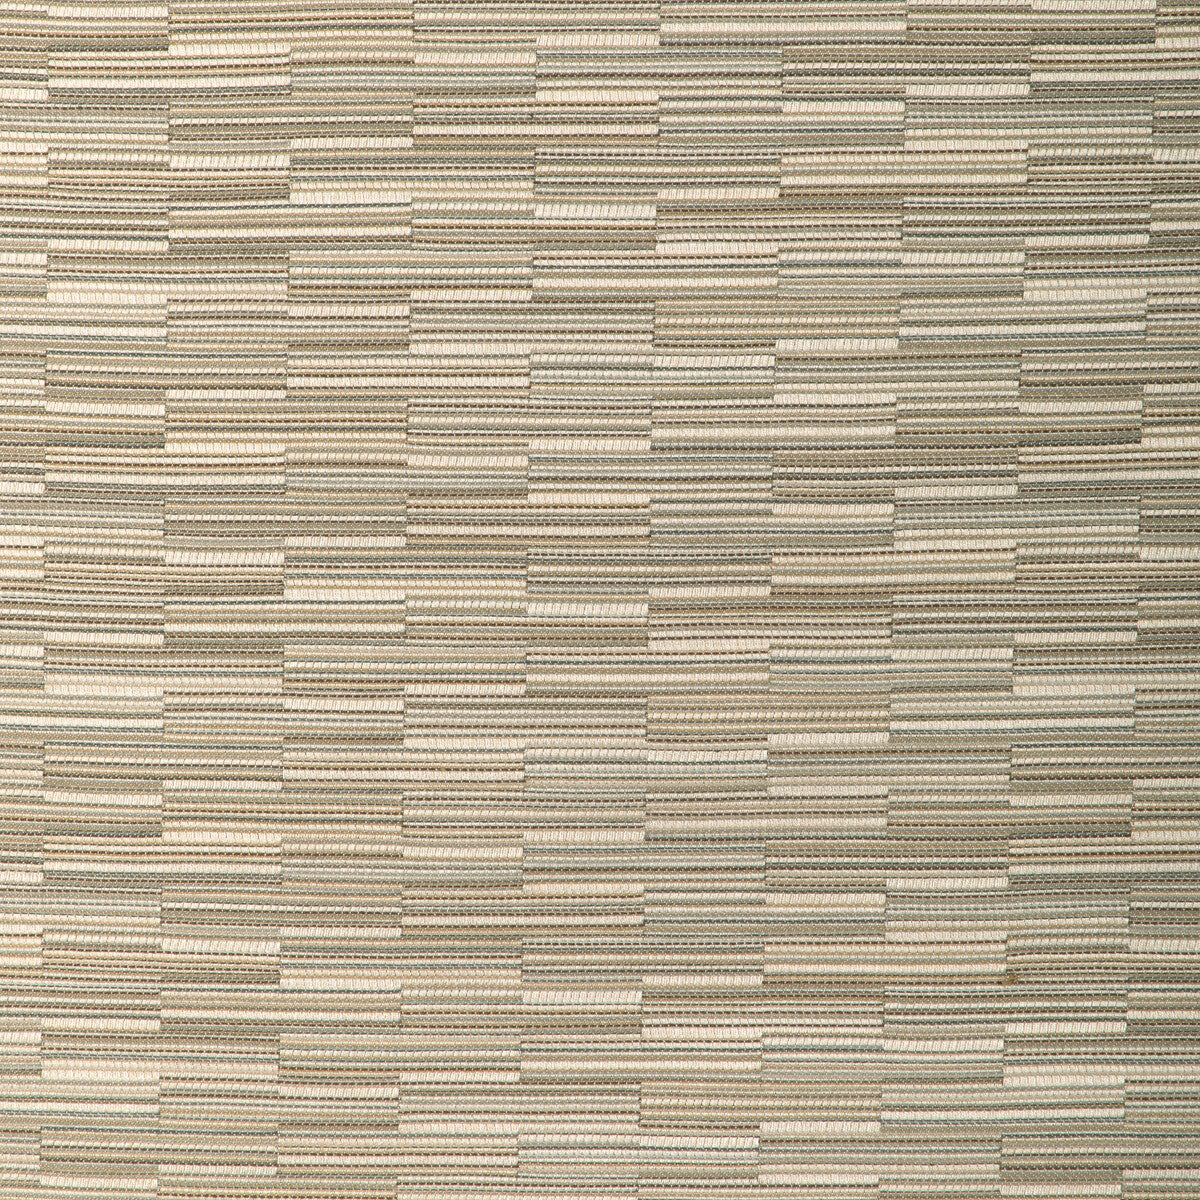 Kravet Design fabric in 37179-106 color - pattern 37179.106.0 - by Kravet Design in the Woven Colors collection